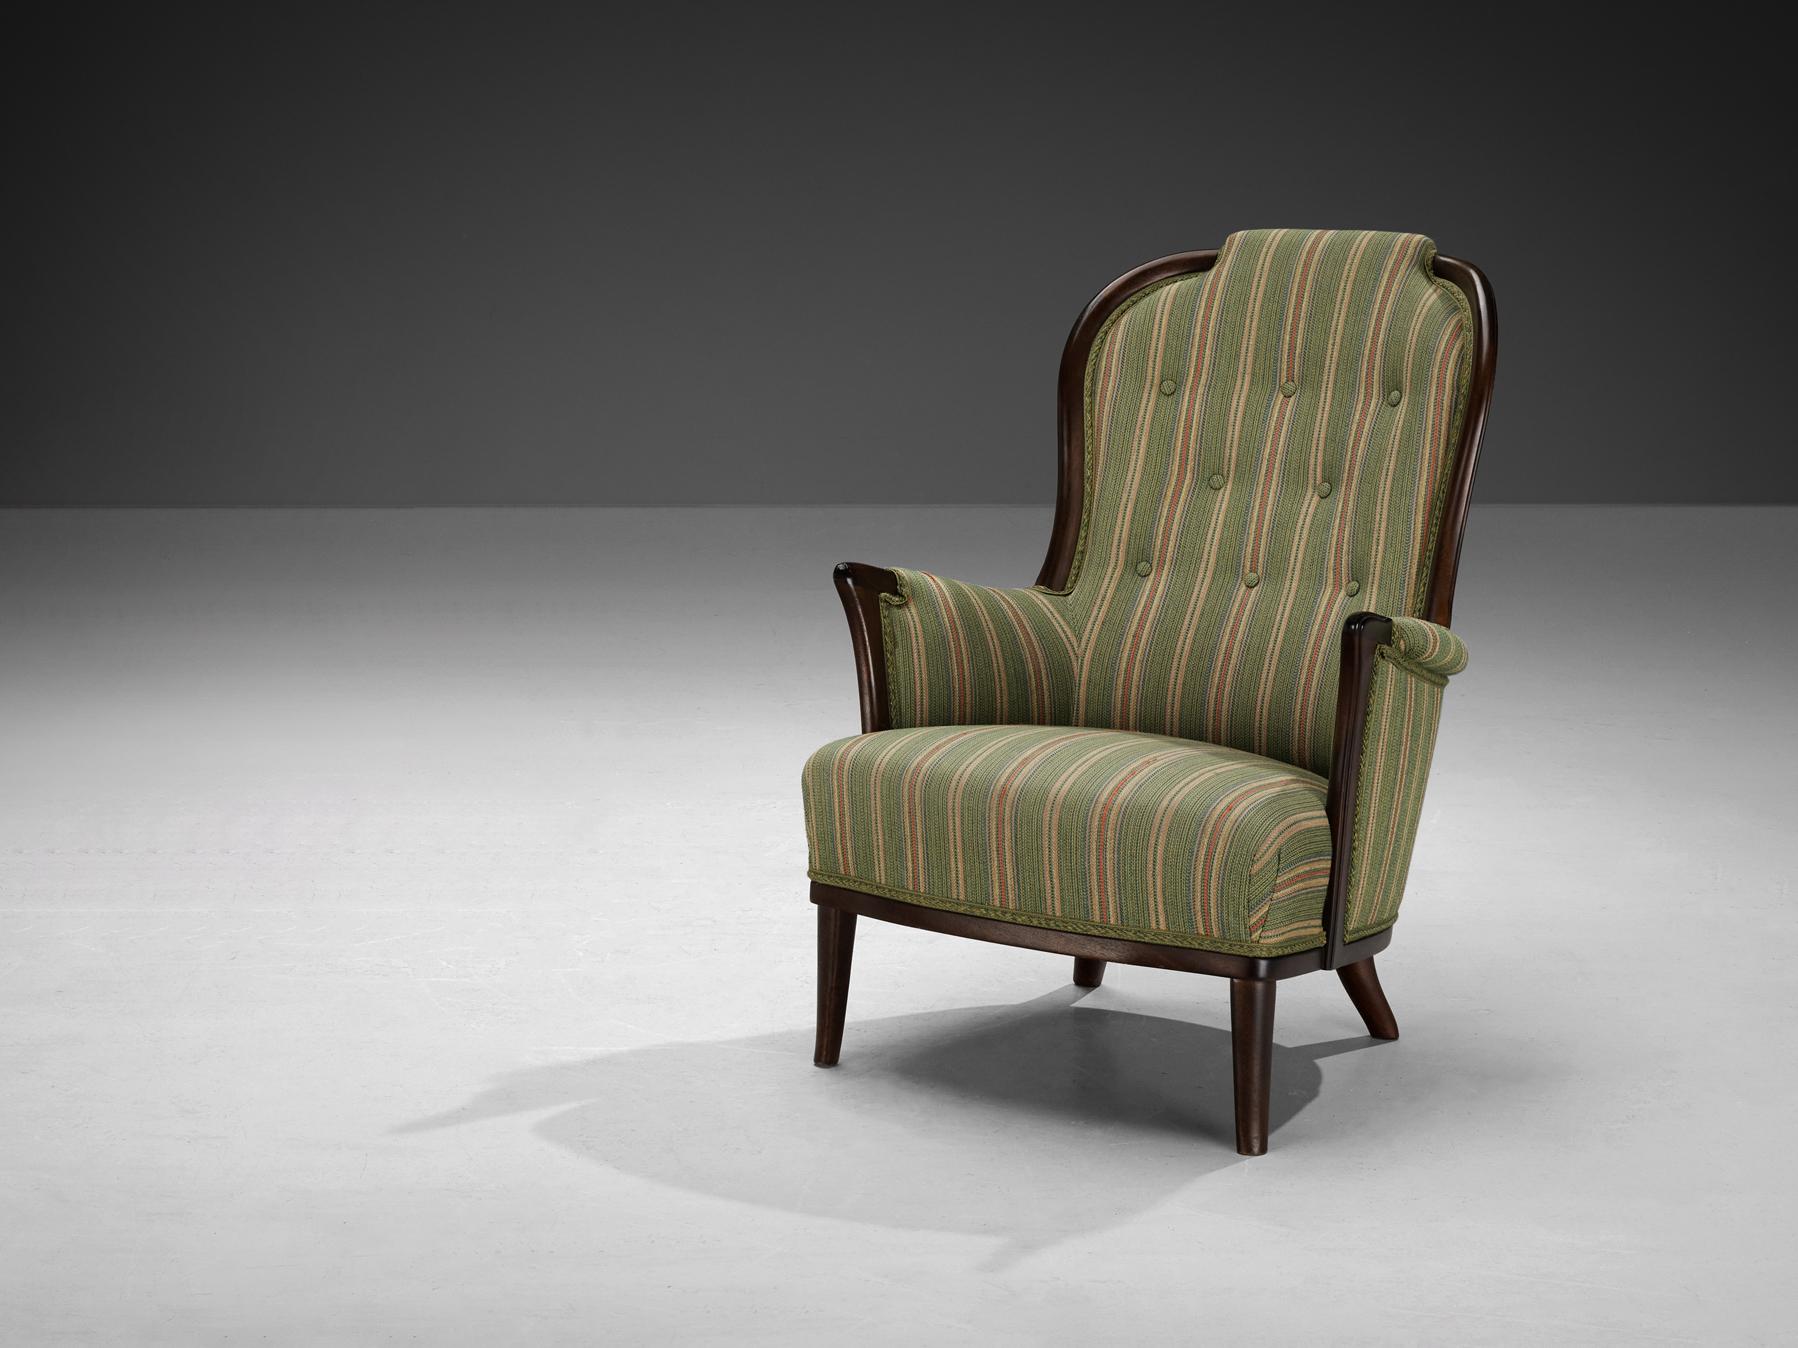 Carl Malmsten for AB O.H. Sjögren, easy chair, fabric, mahogany, Tranås, Sweden, 1987

A wonderful chair that is very well designed by Carl Malmsten. This armchair is upholstered in the original fabric mainly in the color green adorned with colorful